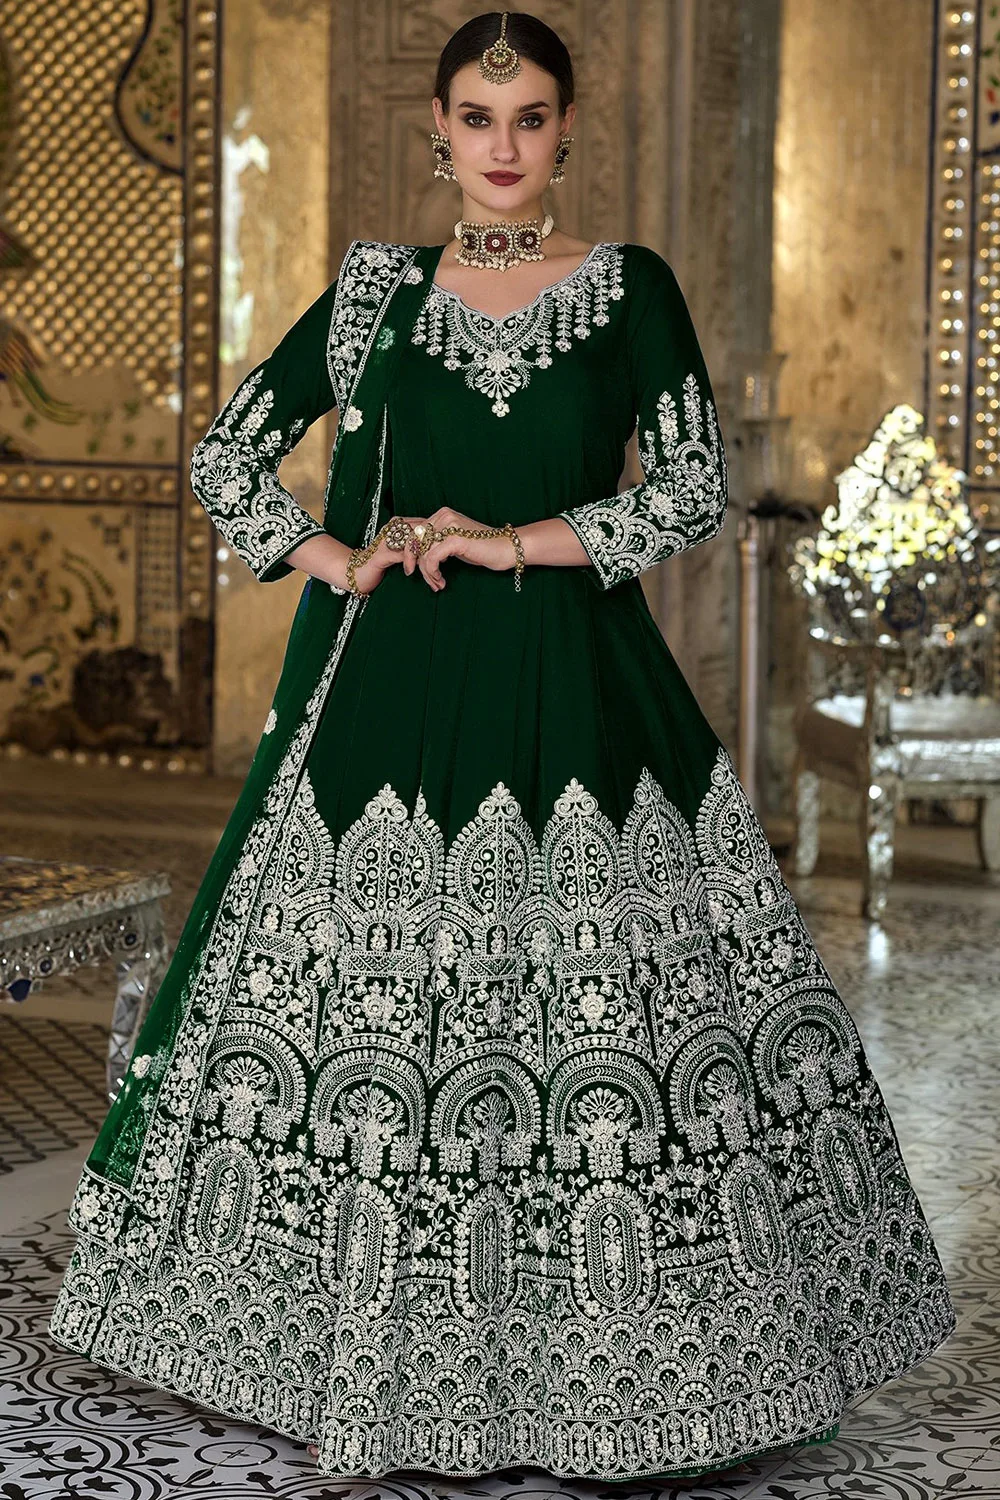 Green Velvet Anarkali Suit with Intricate Embroidery, Butterfly Net Dupatta, and Santoon Bottom